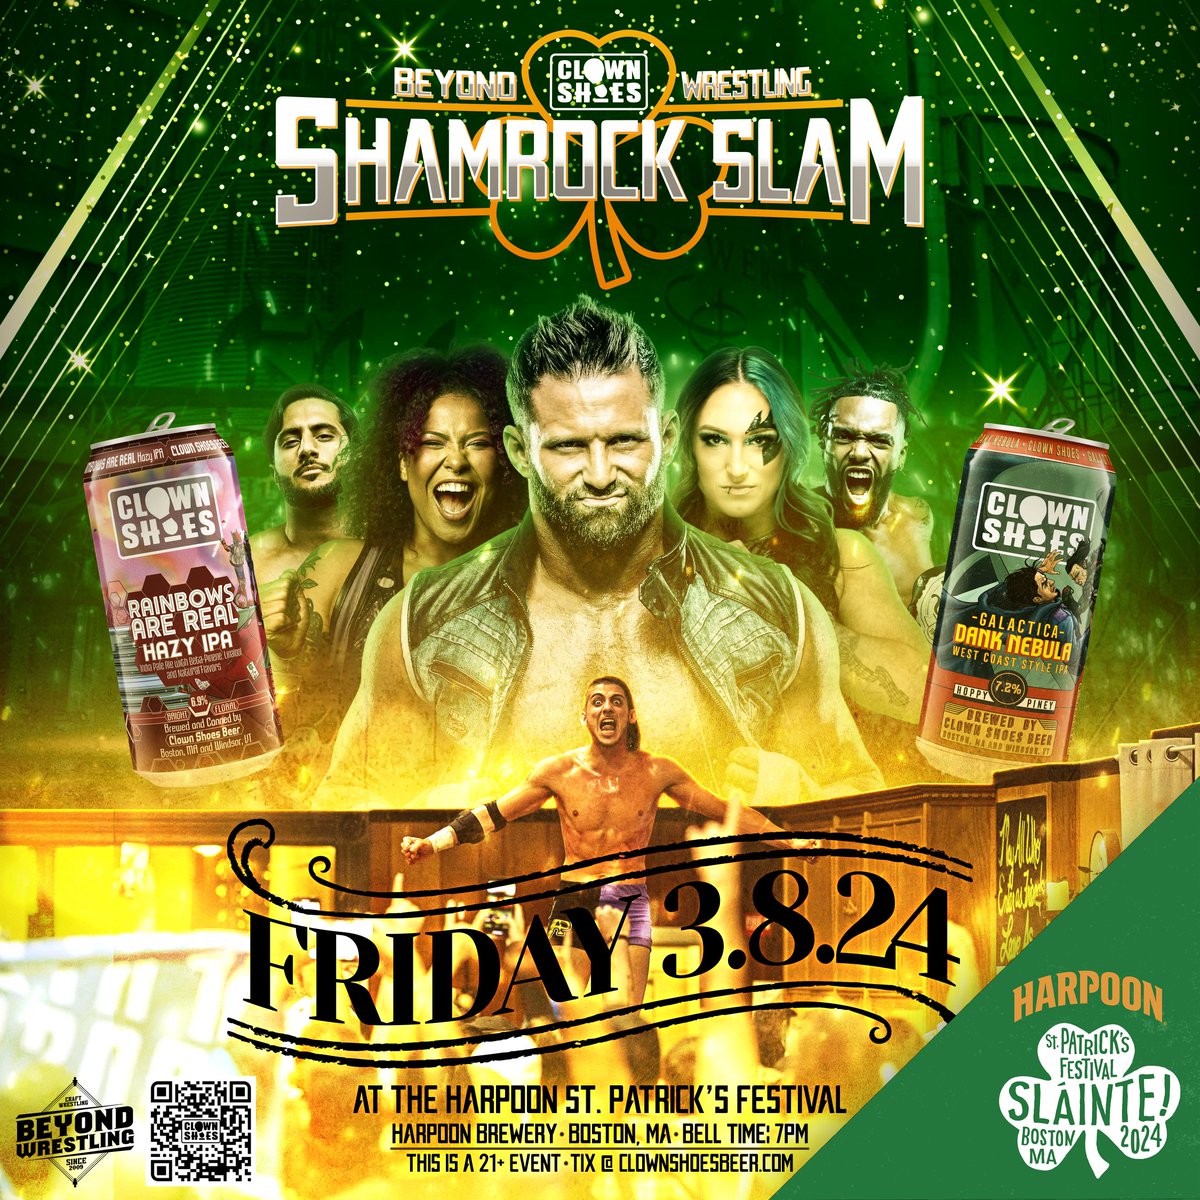 For every 10 RETWEETS we'll announce a new wrestler for the biggest show in #BeyondWrestling history at @harpoonbrewery in Boston, MA on Friday, 3/8/24 for the St. Patrick's Festival! @clownshoesbeer #ShamrockSlam tickets are now on sale at ClownShoesBeer.com Featuring: -…